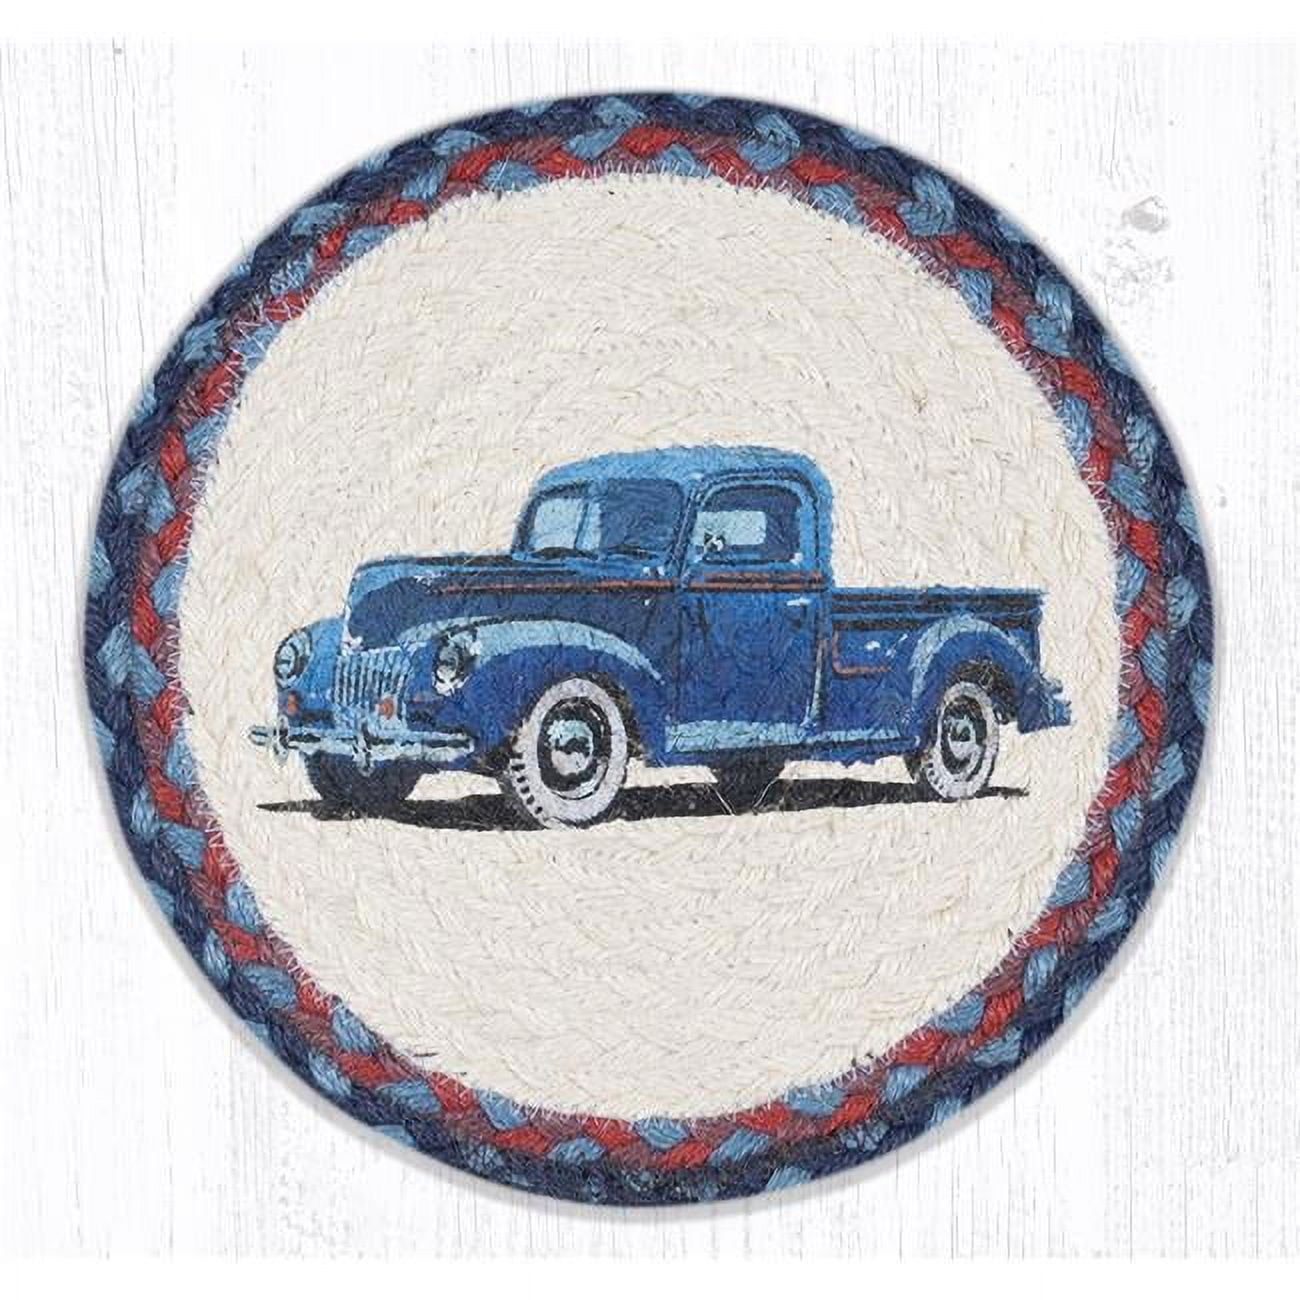 Capitol Importing 80-362bt 10 X 10 In. Mspr-362 Blue Truck Printed Round Trivet